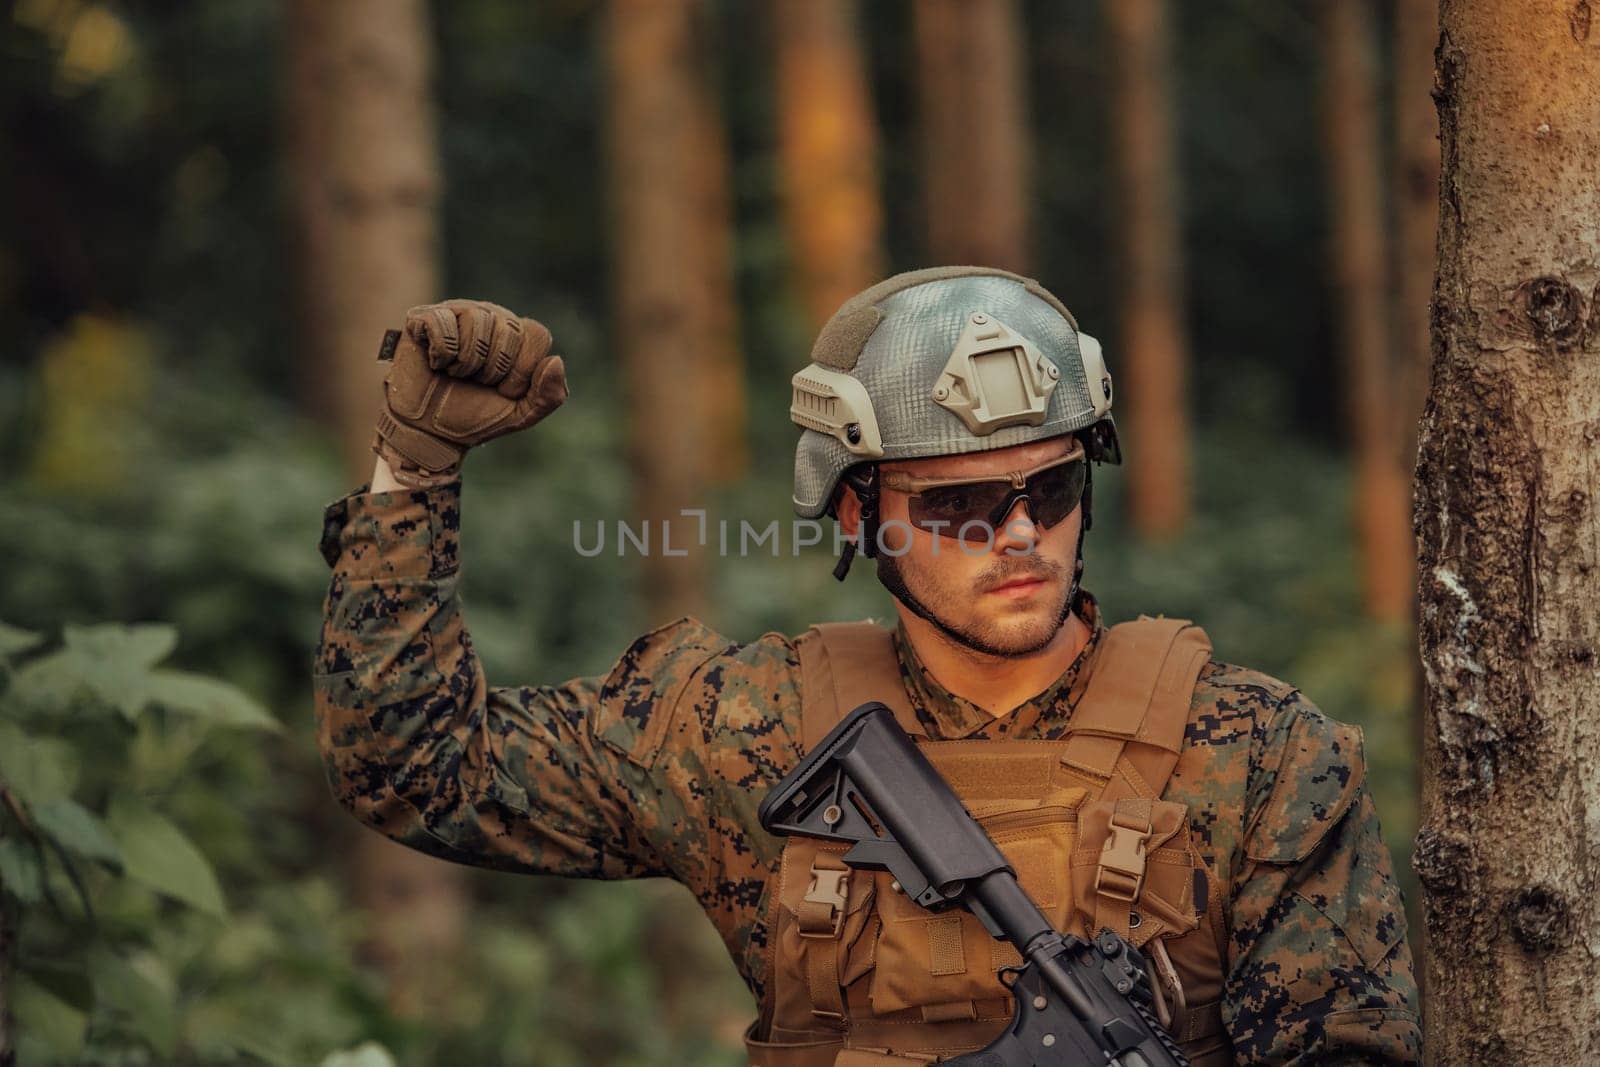 Modern warfare soldier officer is showing tactical hand signals to silently give orders and alers for squad team forest enviroment by dotshock